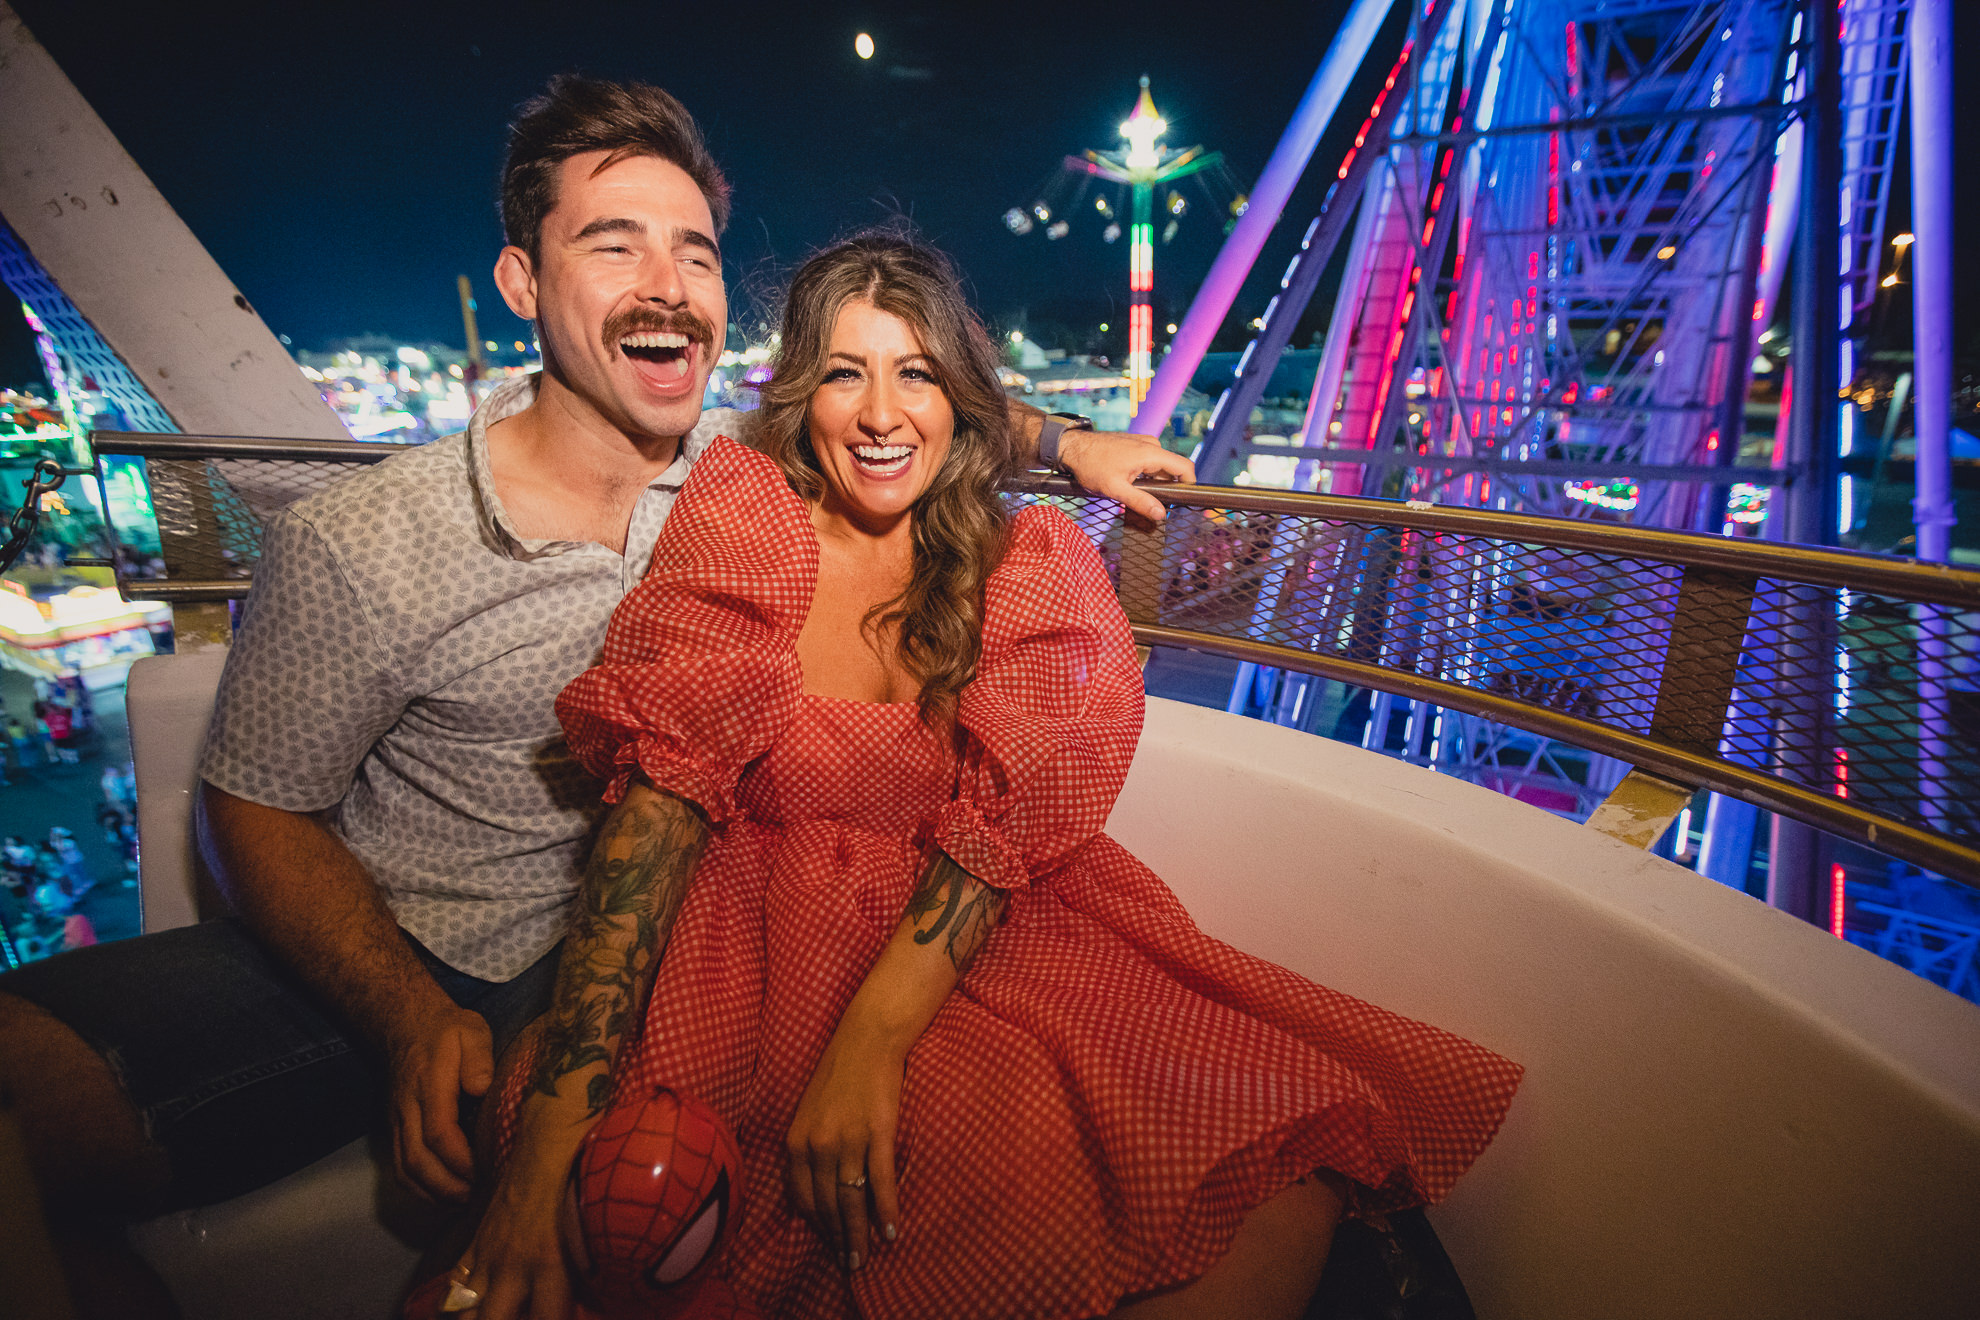 couple laugh on ferris wheel during their wedding engagement photography session at the Erie County Fair